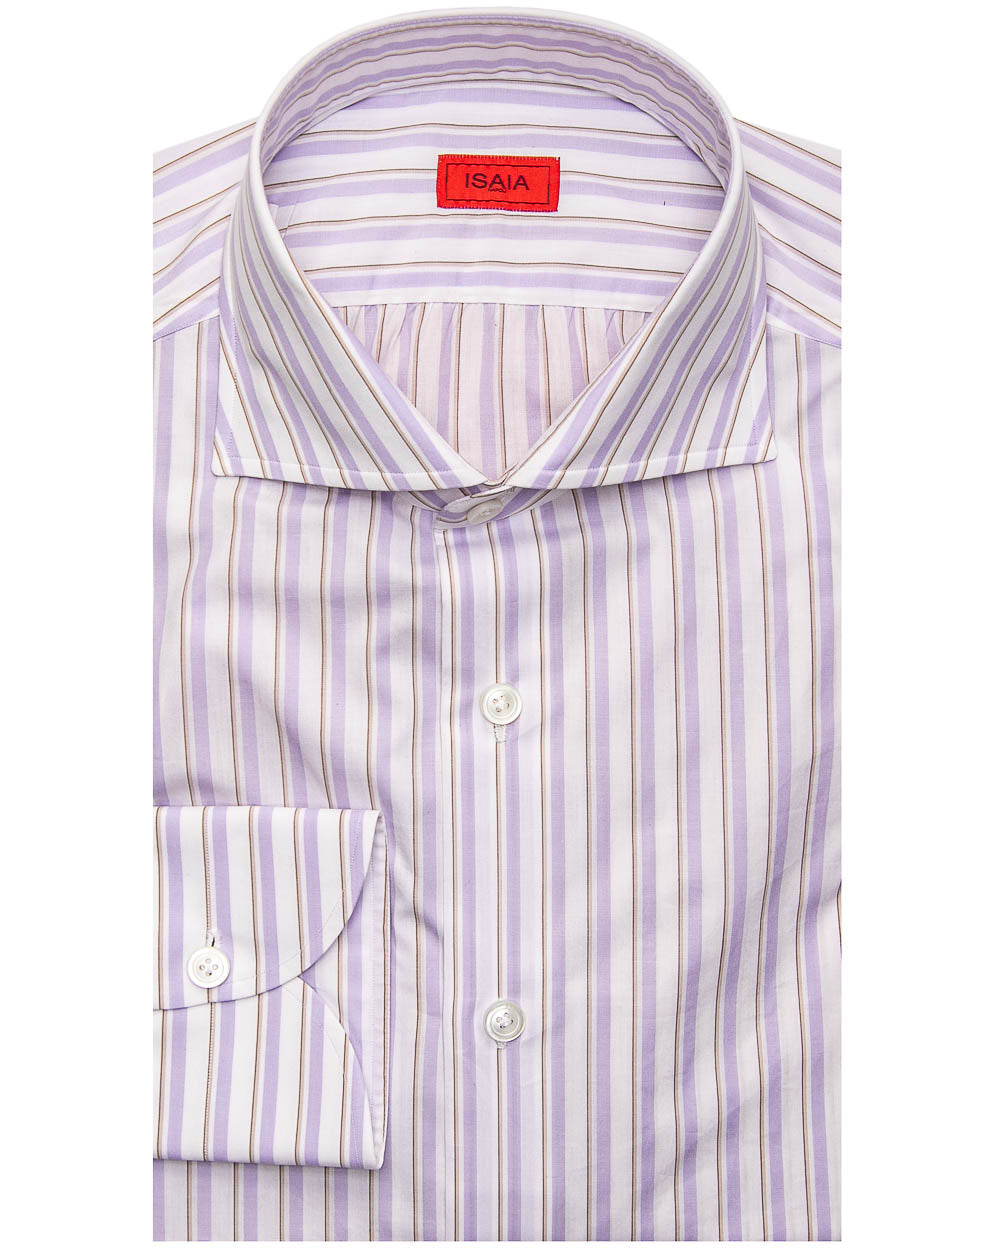 Lavender and Tan Striped Shirt